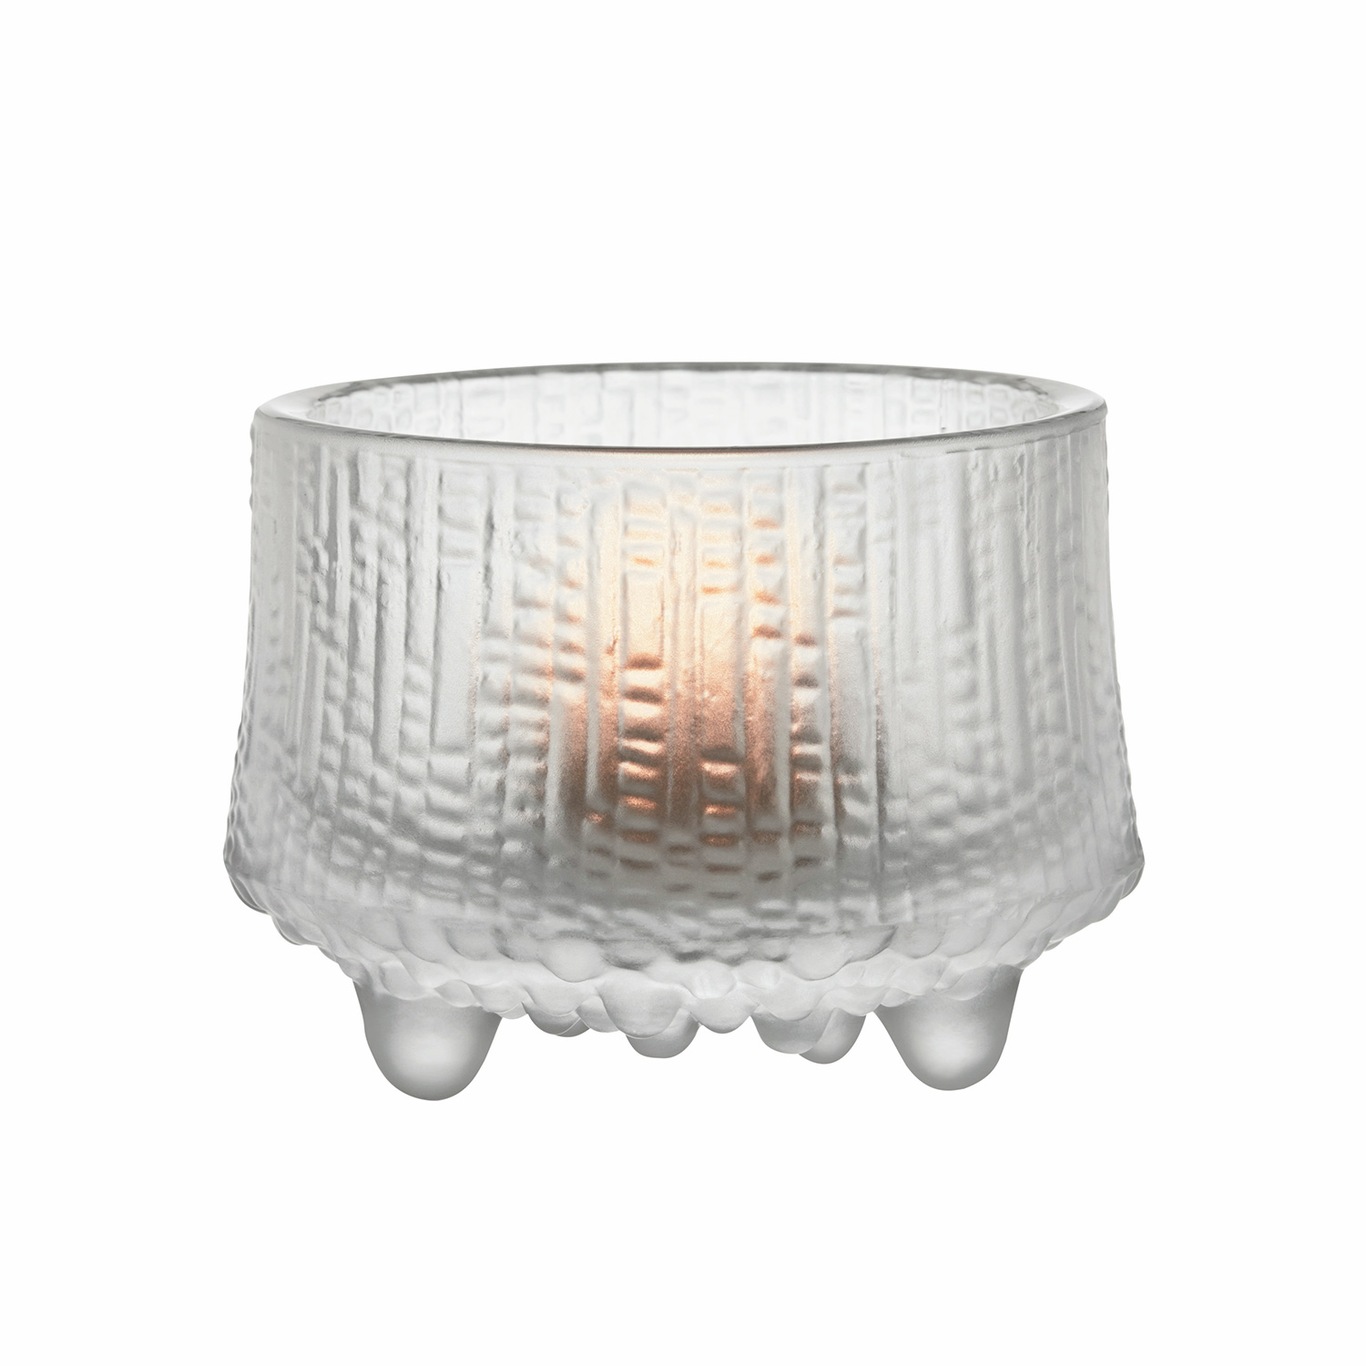 Ultima Thule Candle Holder 6,5 cm, Frost